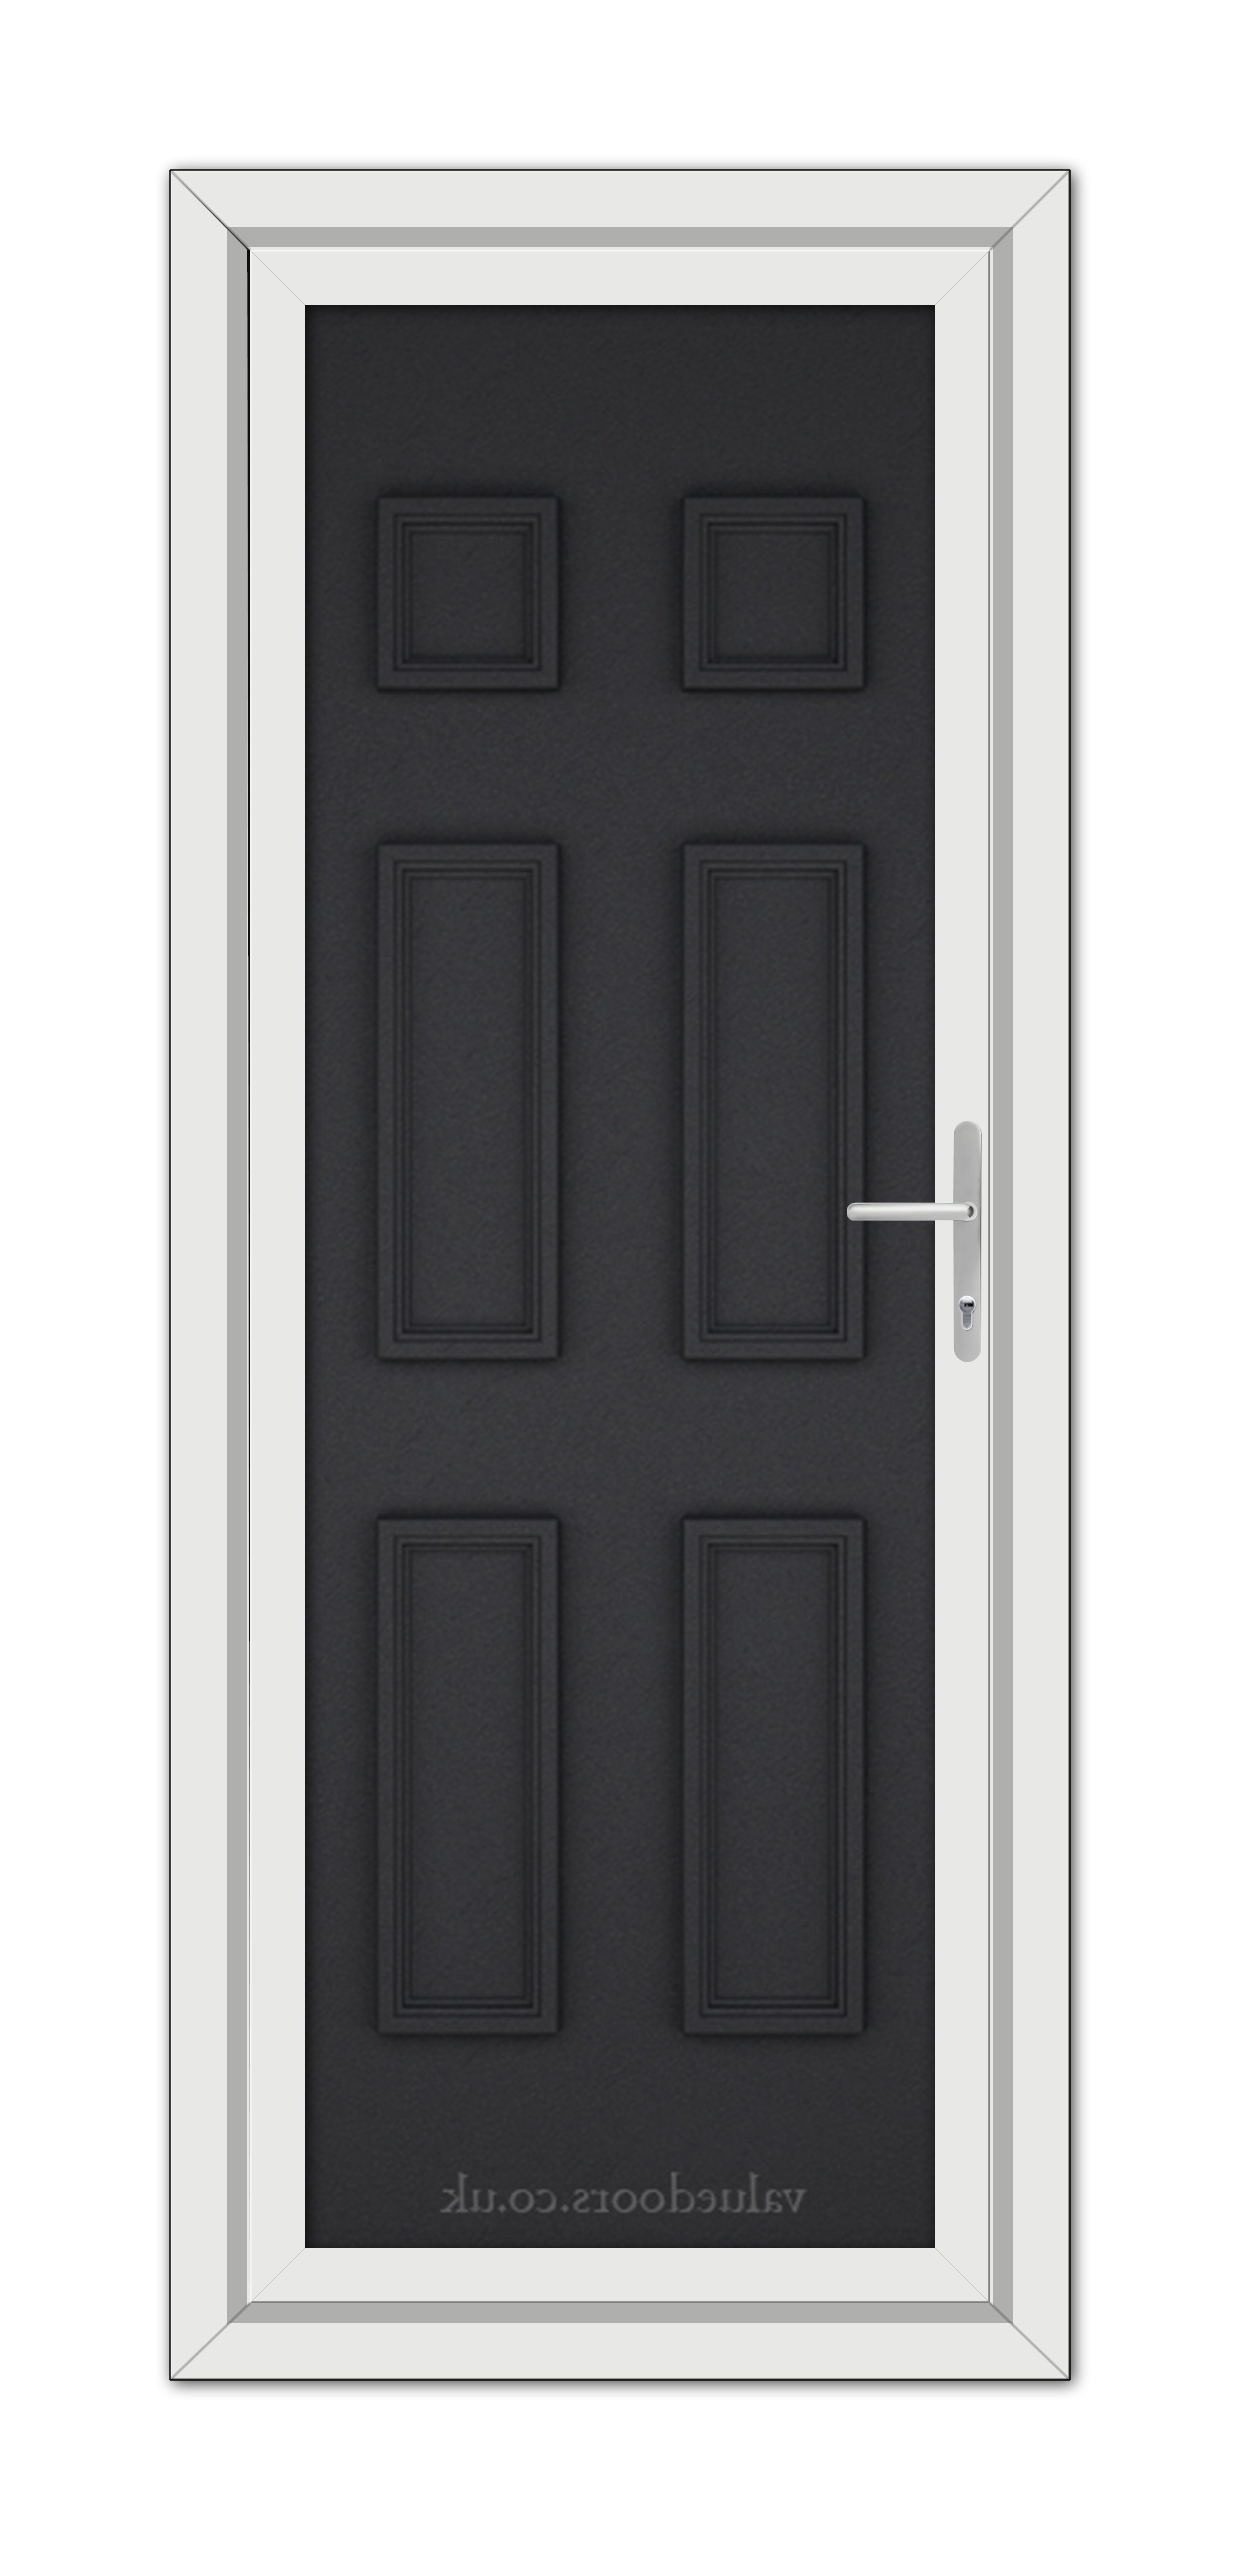 A modern Black Brown Windsor Solid uPVC door with six panels and a silver handle, set in a white door frame.